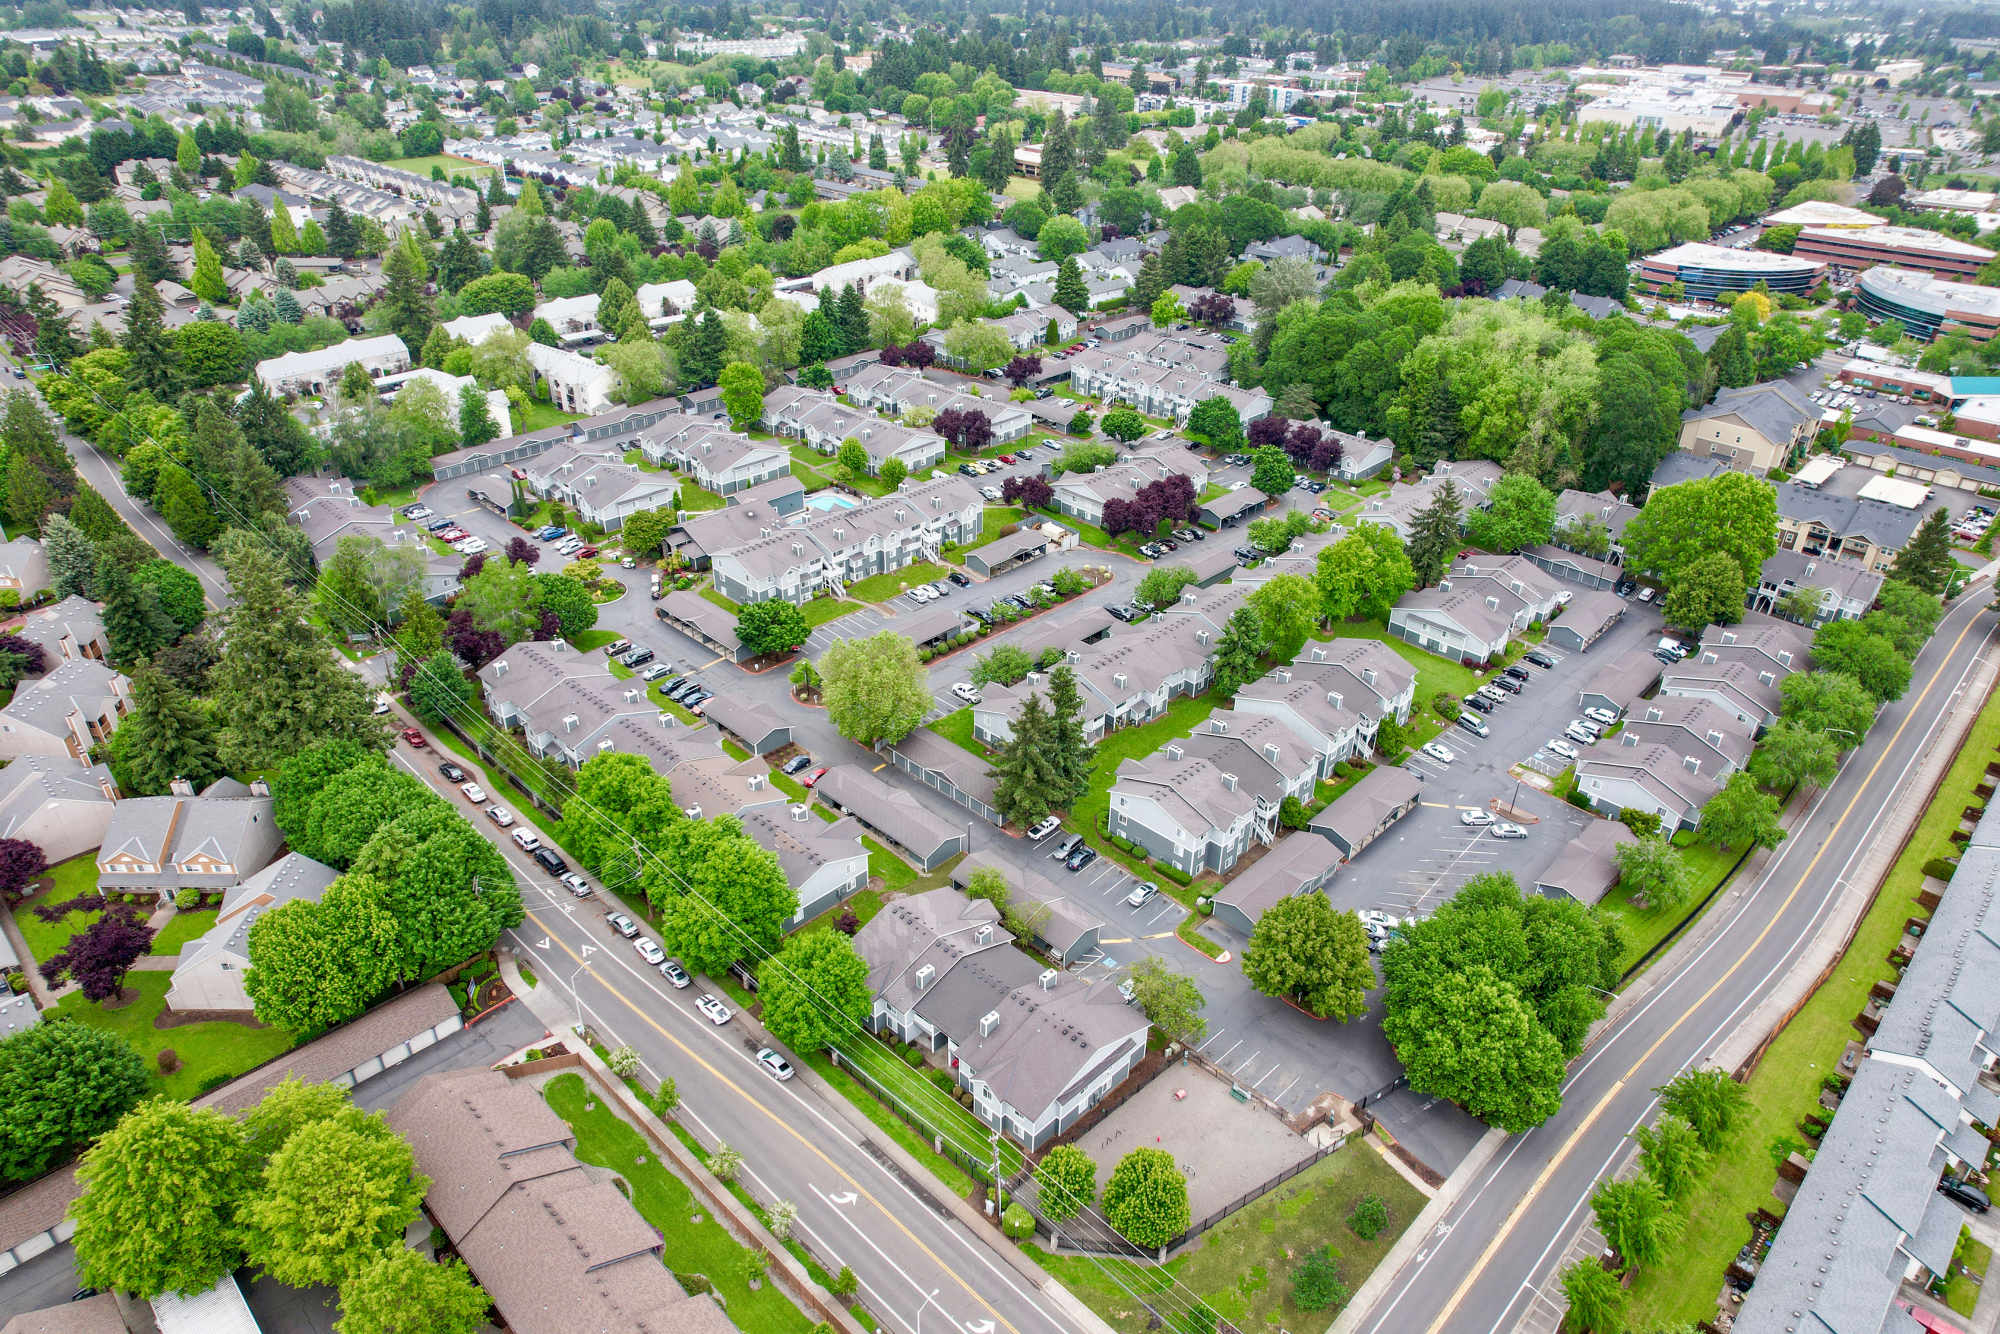 Aerial view of the property and surrounding area at Walnut Grove Landing Apartments in Vancouver, Washington